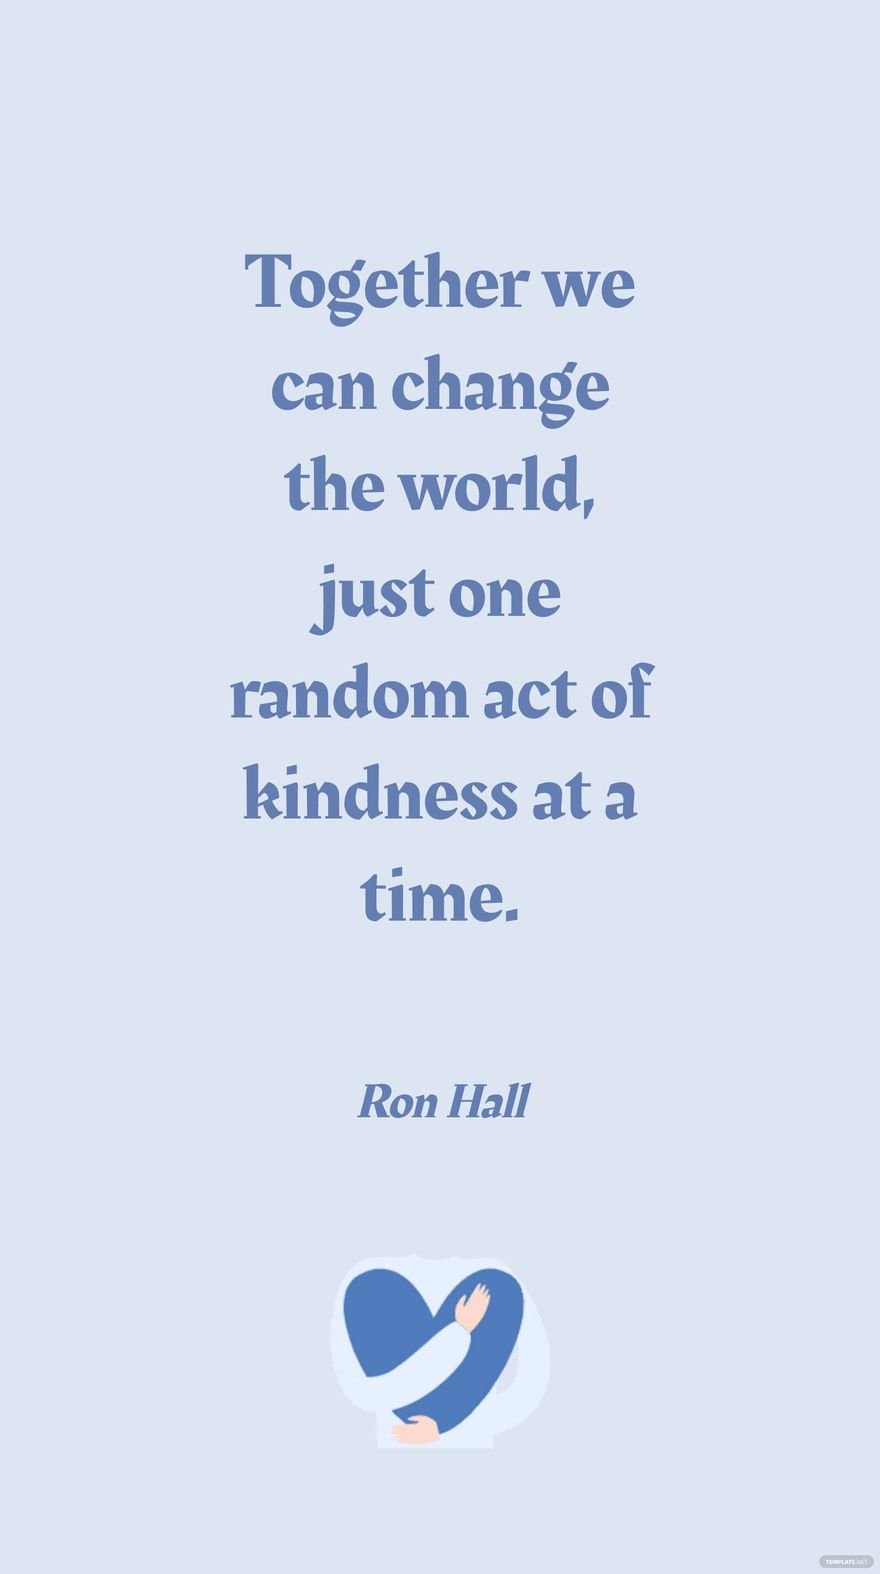 Ron Hall - Together we can change the world, just one random act of kindness at a time. in JPG